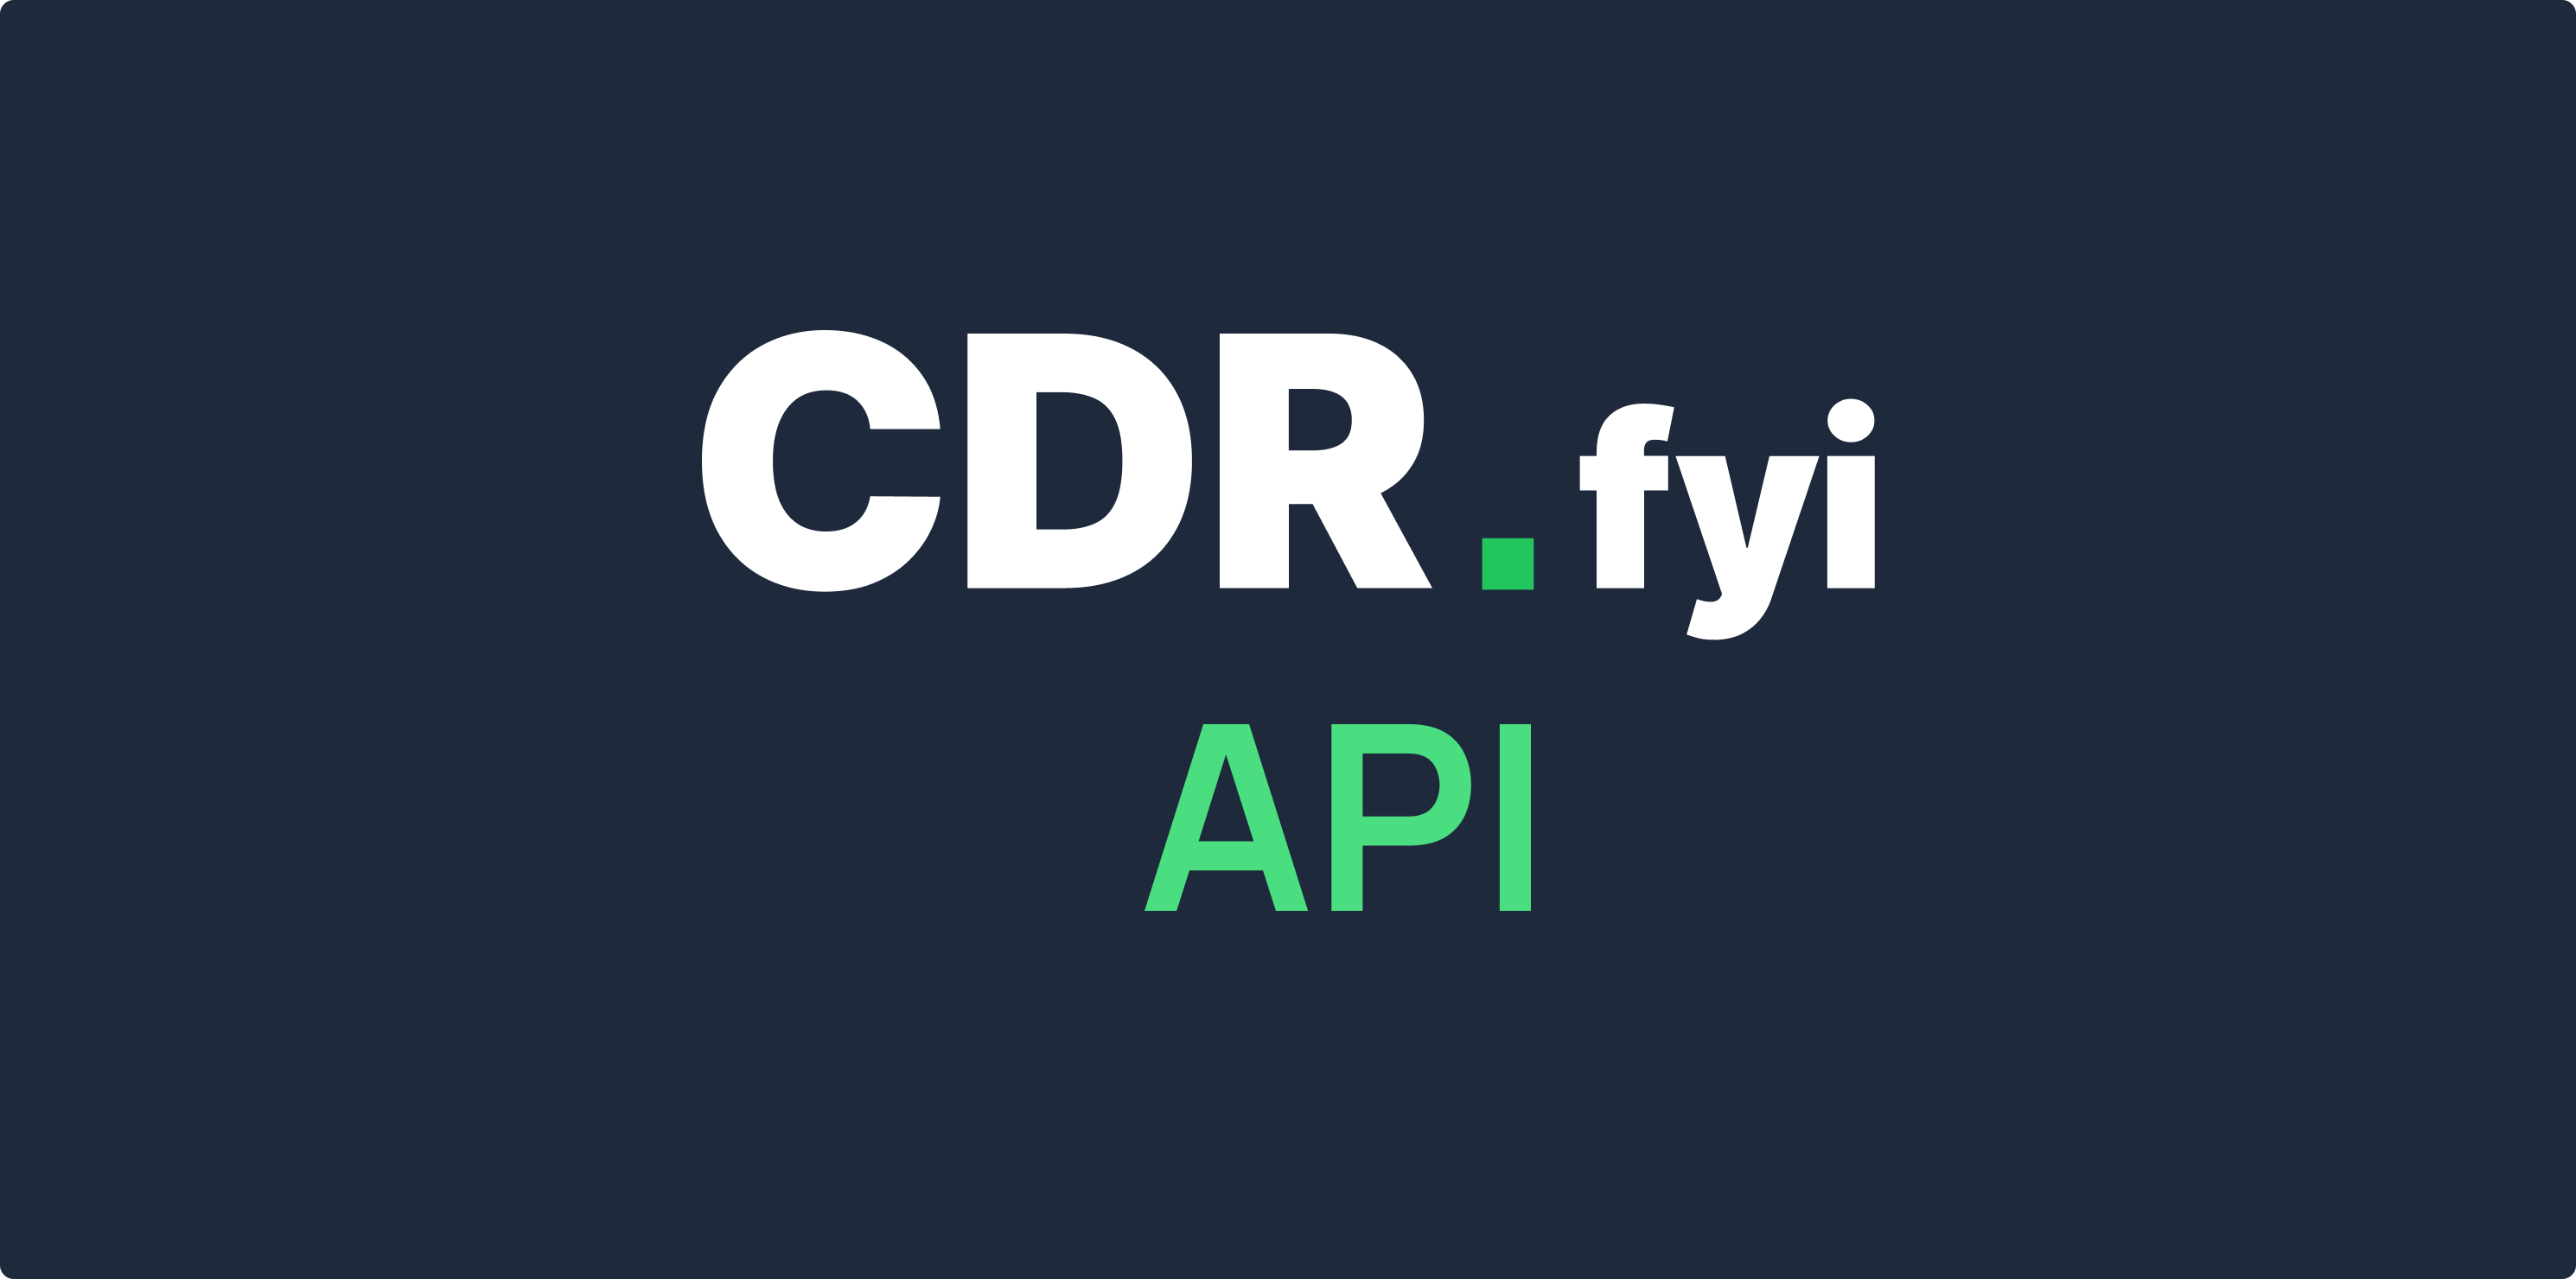 Today, we’re excited to announce the launch of the CDR.fyi API, a powerful new way to access the world's largest data platform of high-permanen